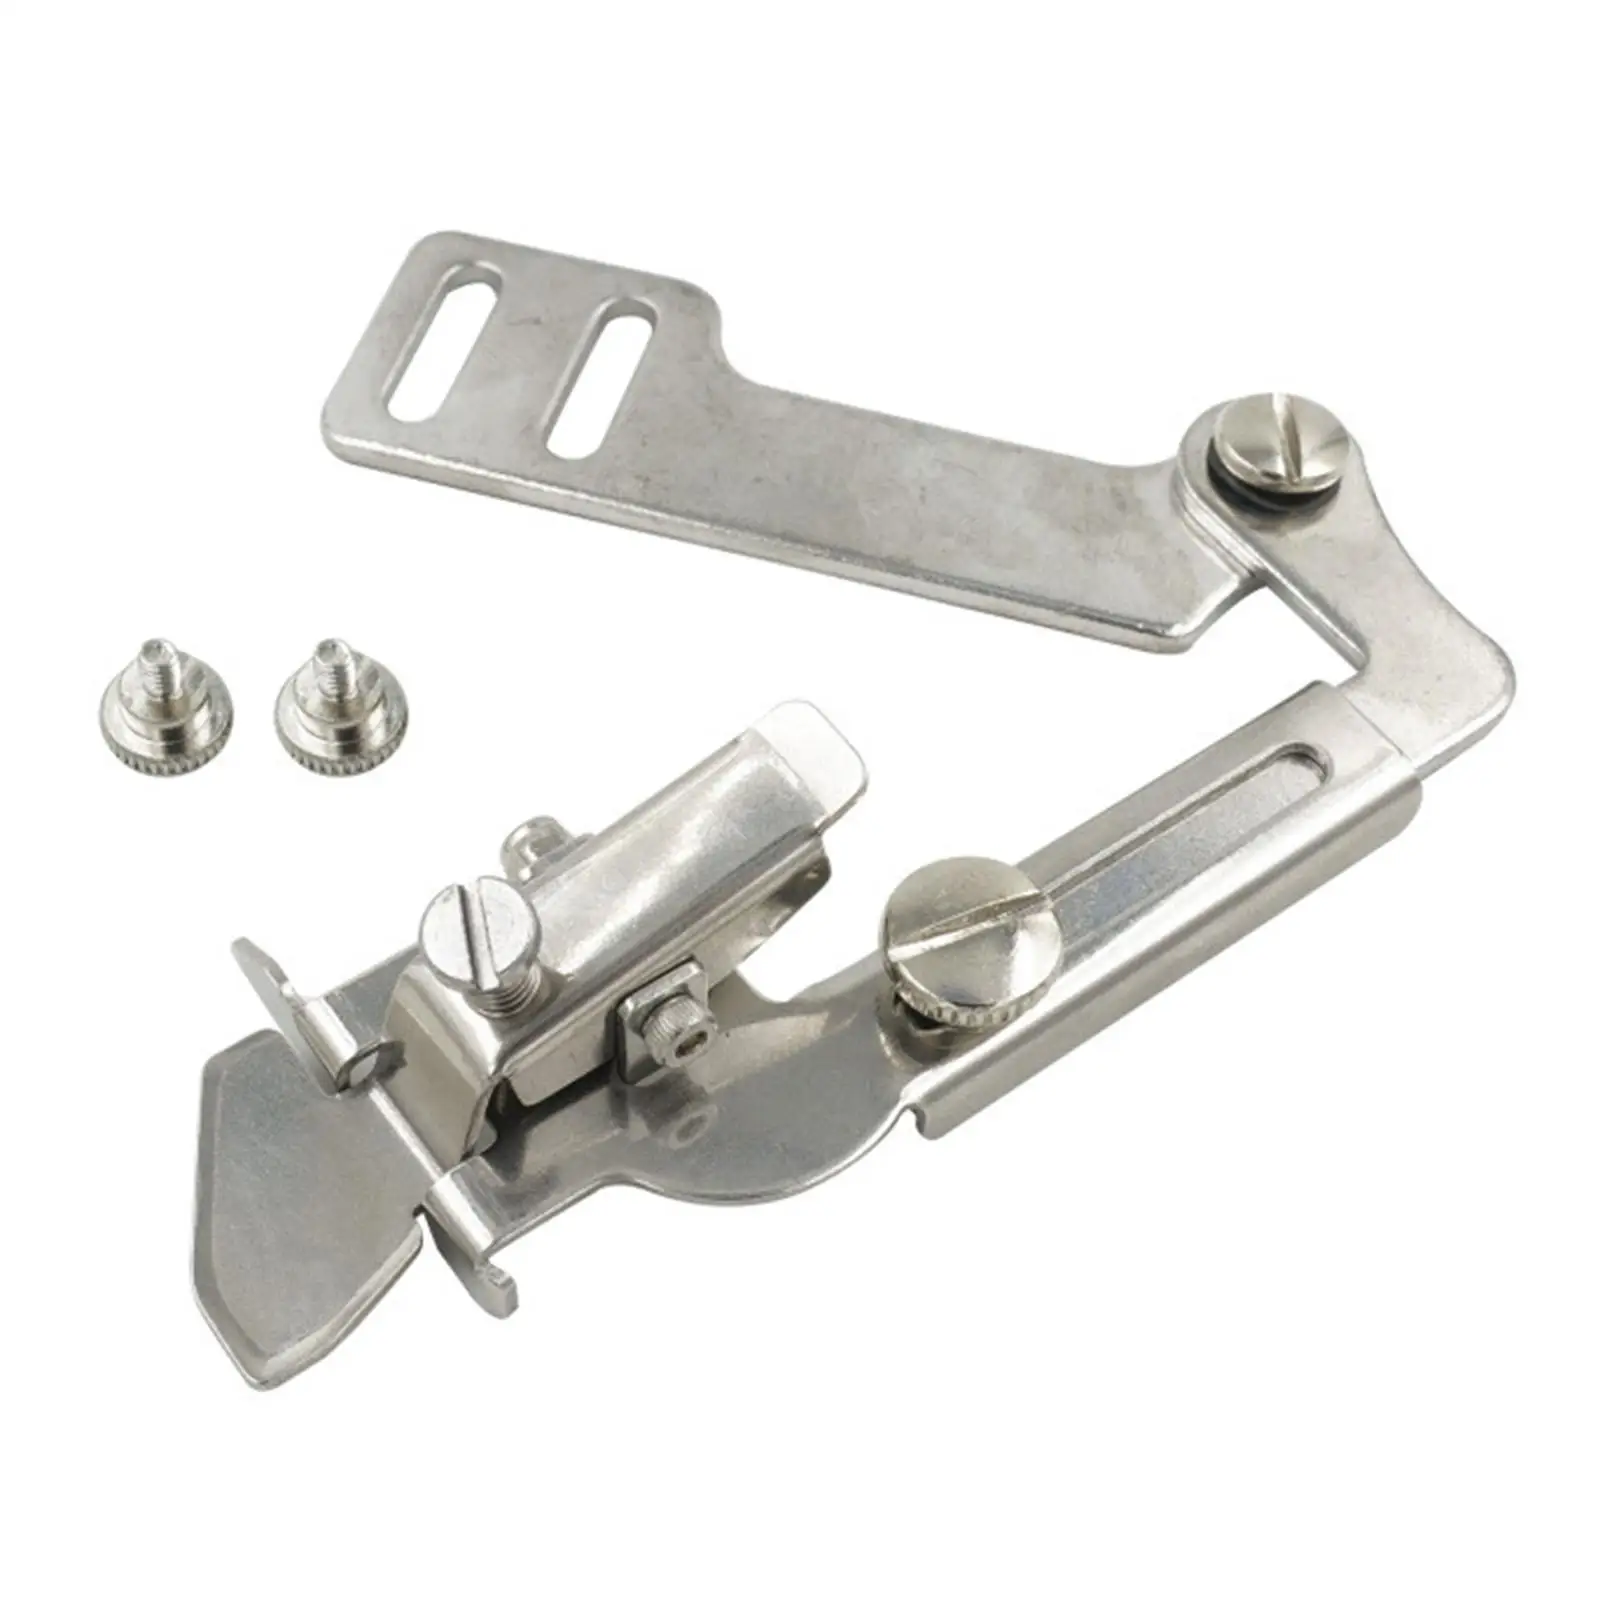 Sewing Machine Presser Foot Household Universal Edge Guide Accessories